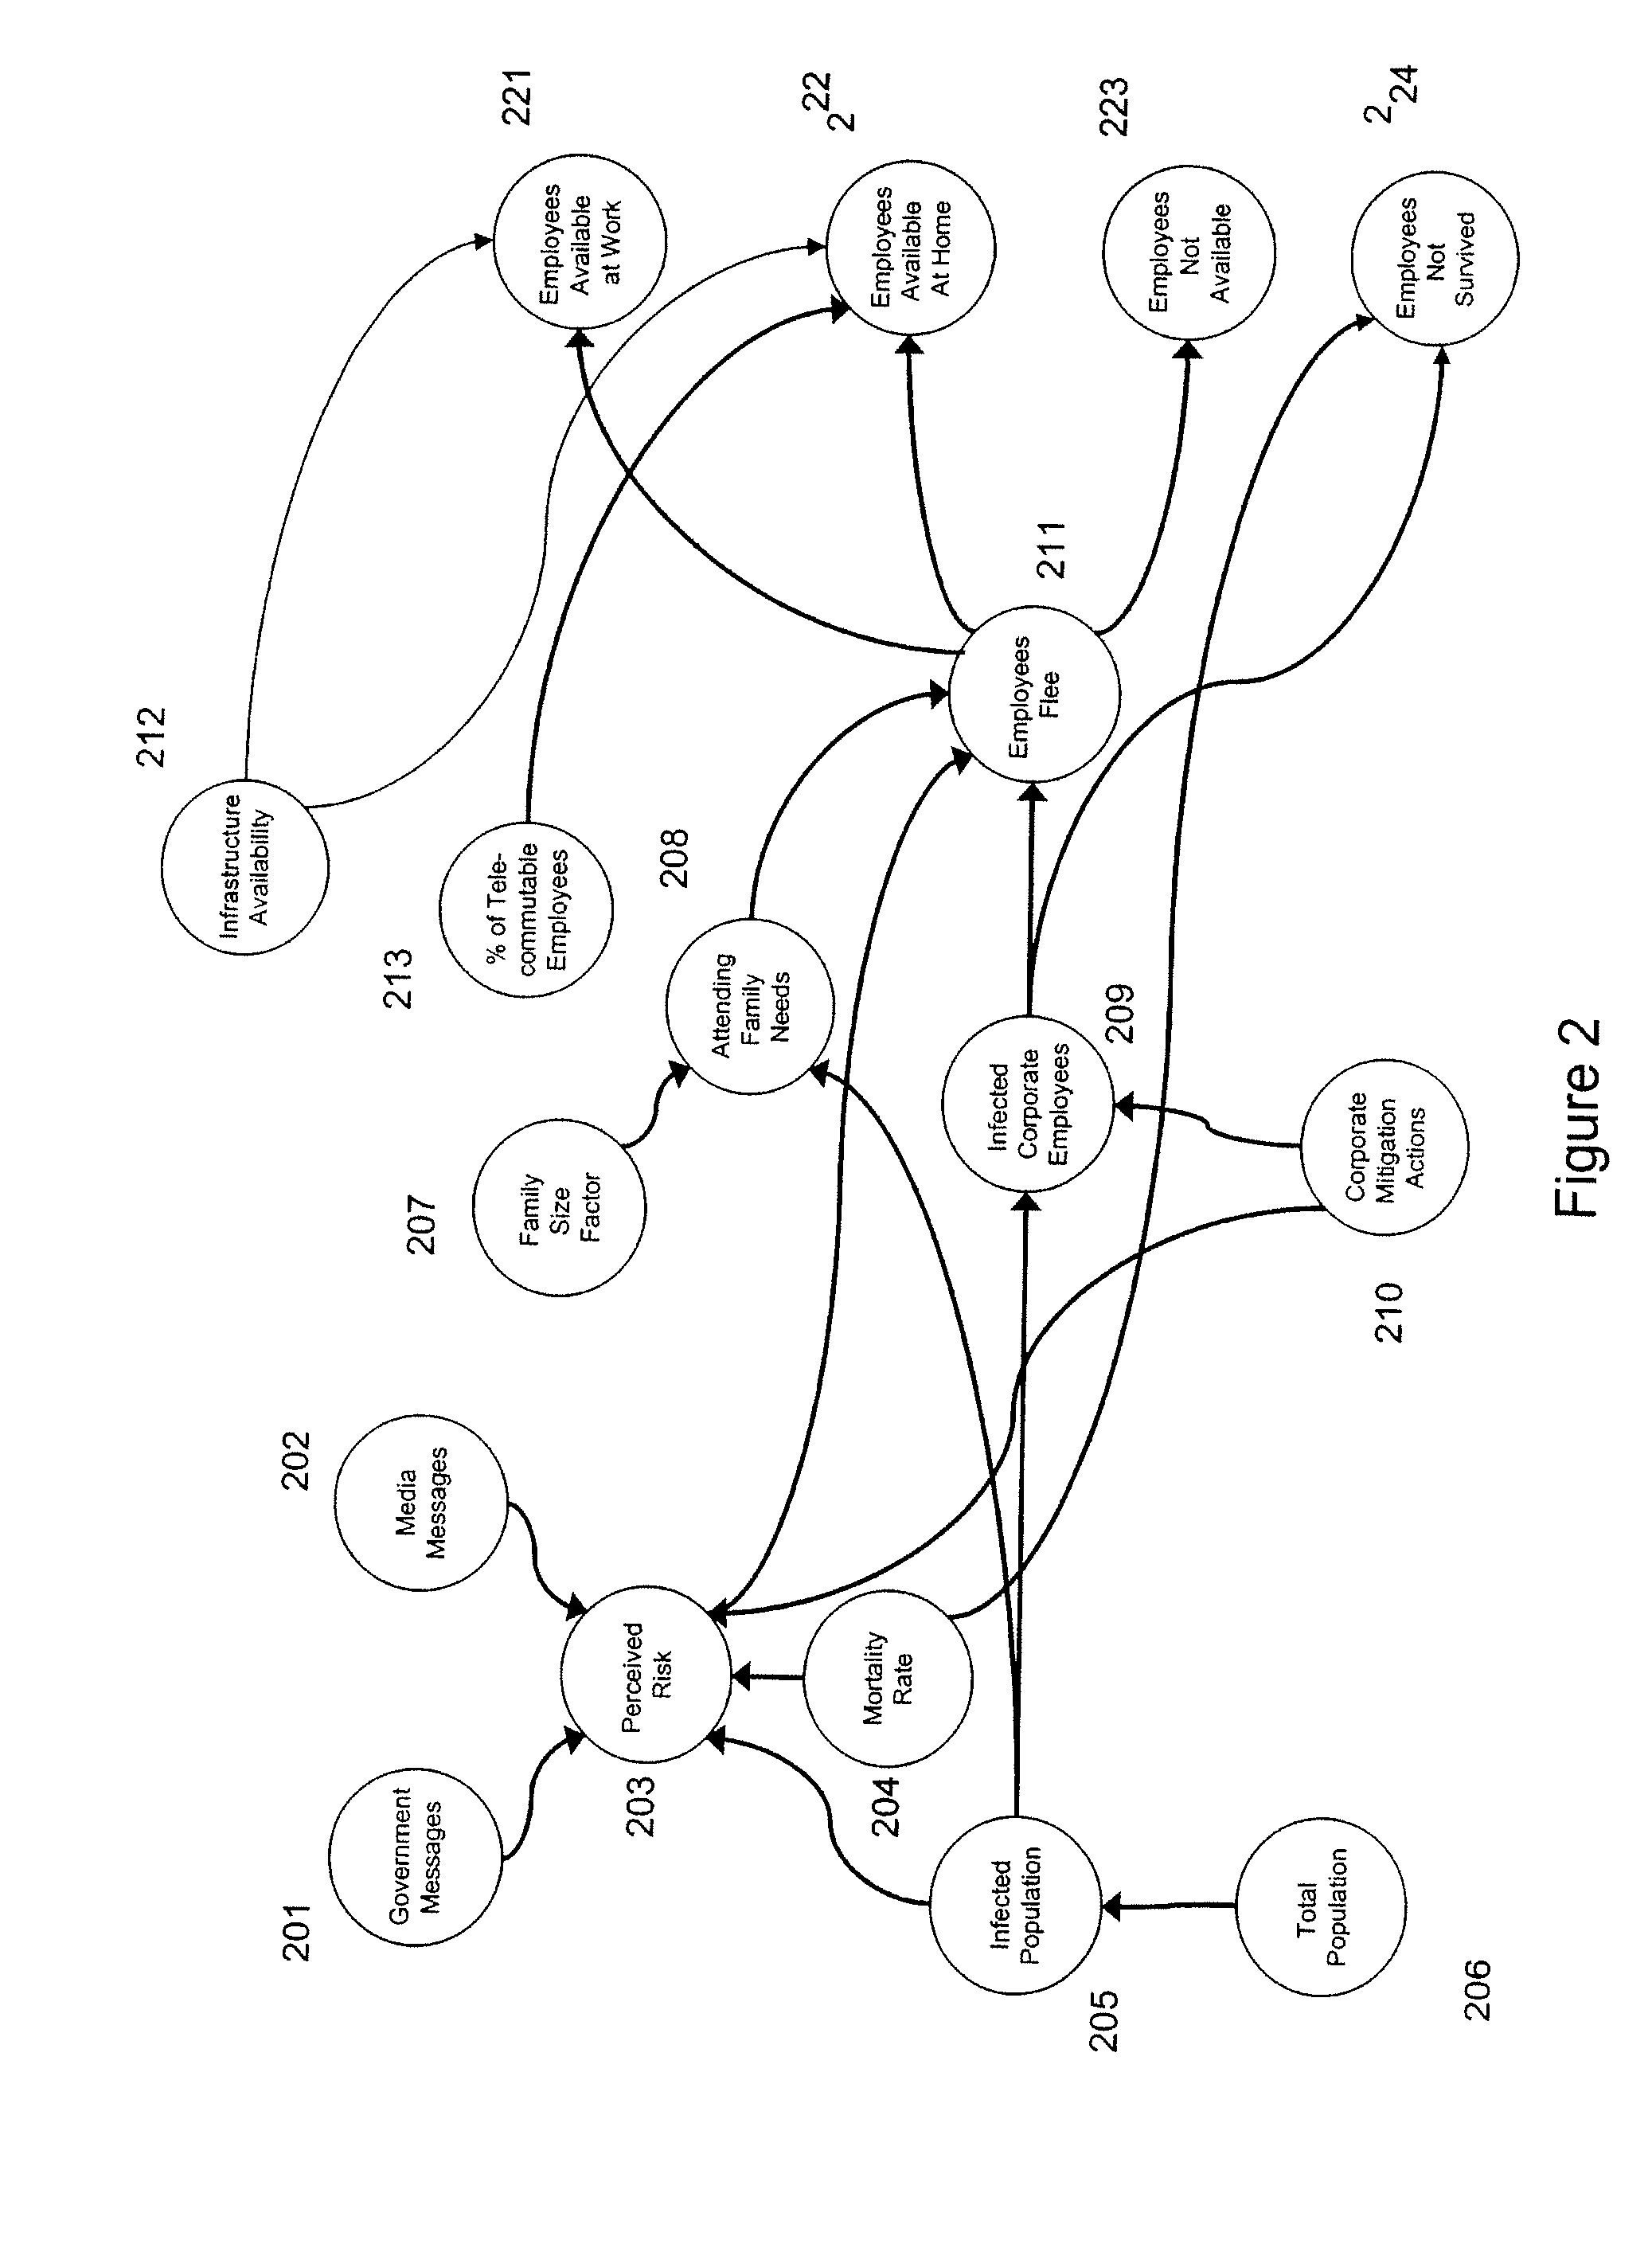 Method and system for estimating dynamics of workforce absenteeism using information on pandemic spread and mitigation actions